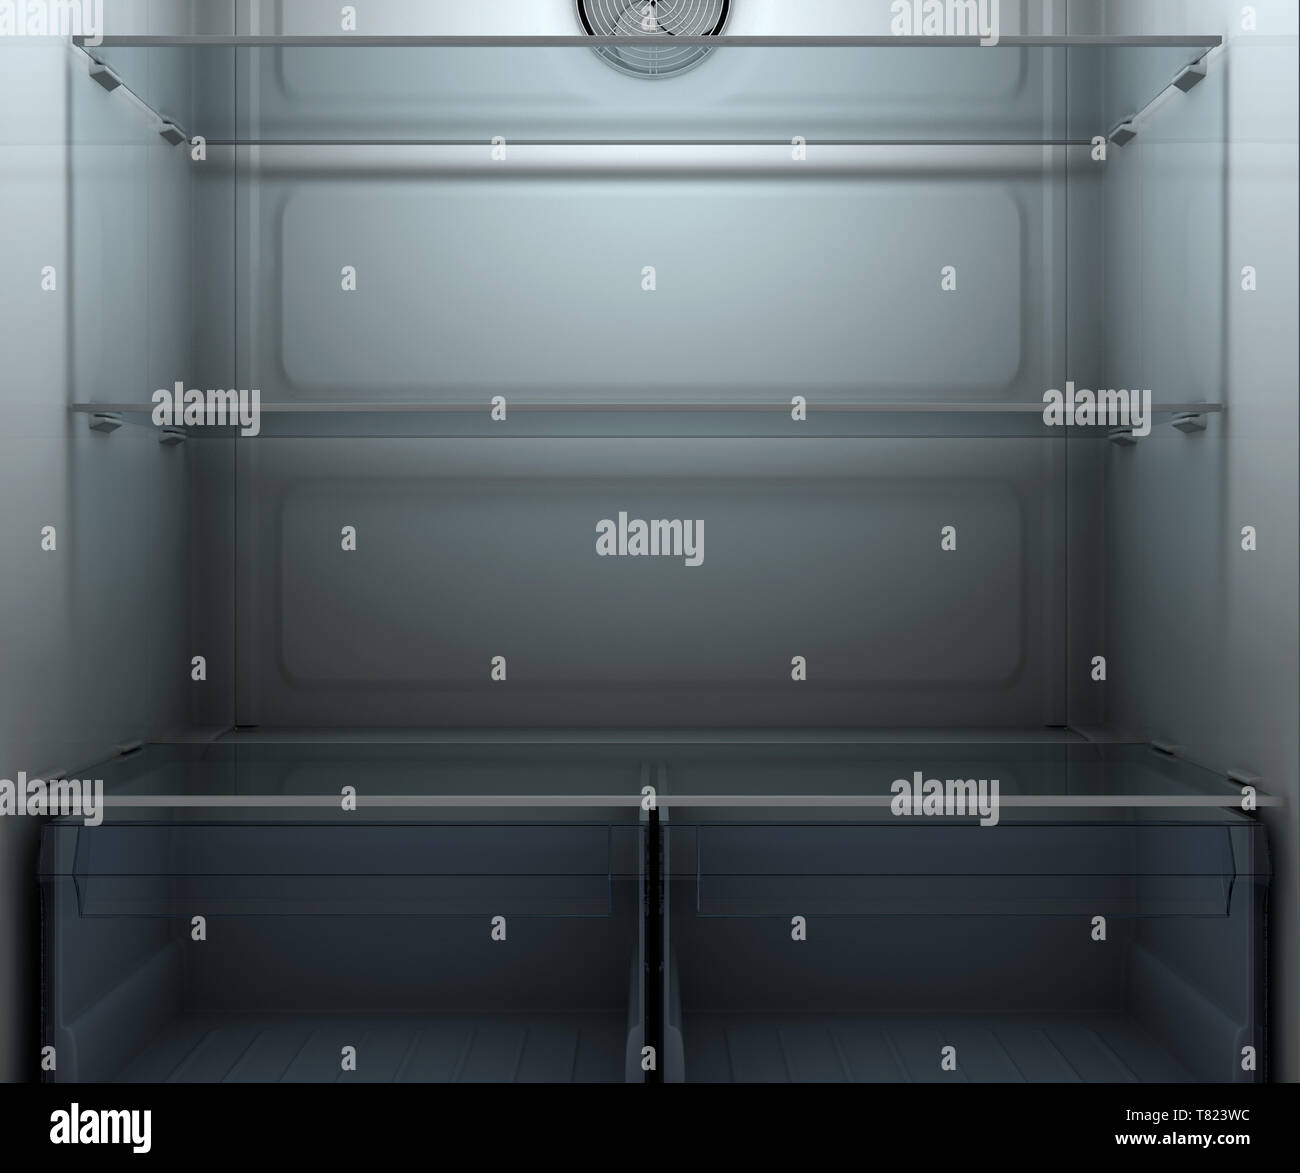 A view inside a dimly lit empty household fridge or freezer with glass shelves and drawers - 3D render Stock Photo